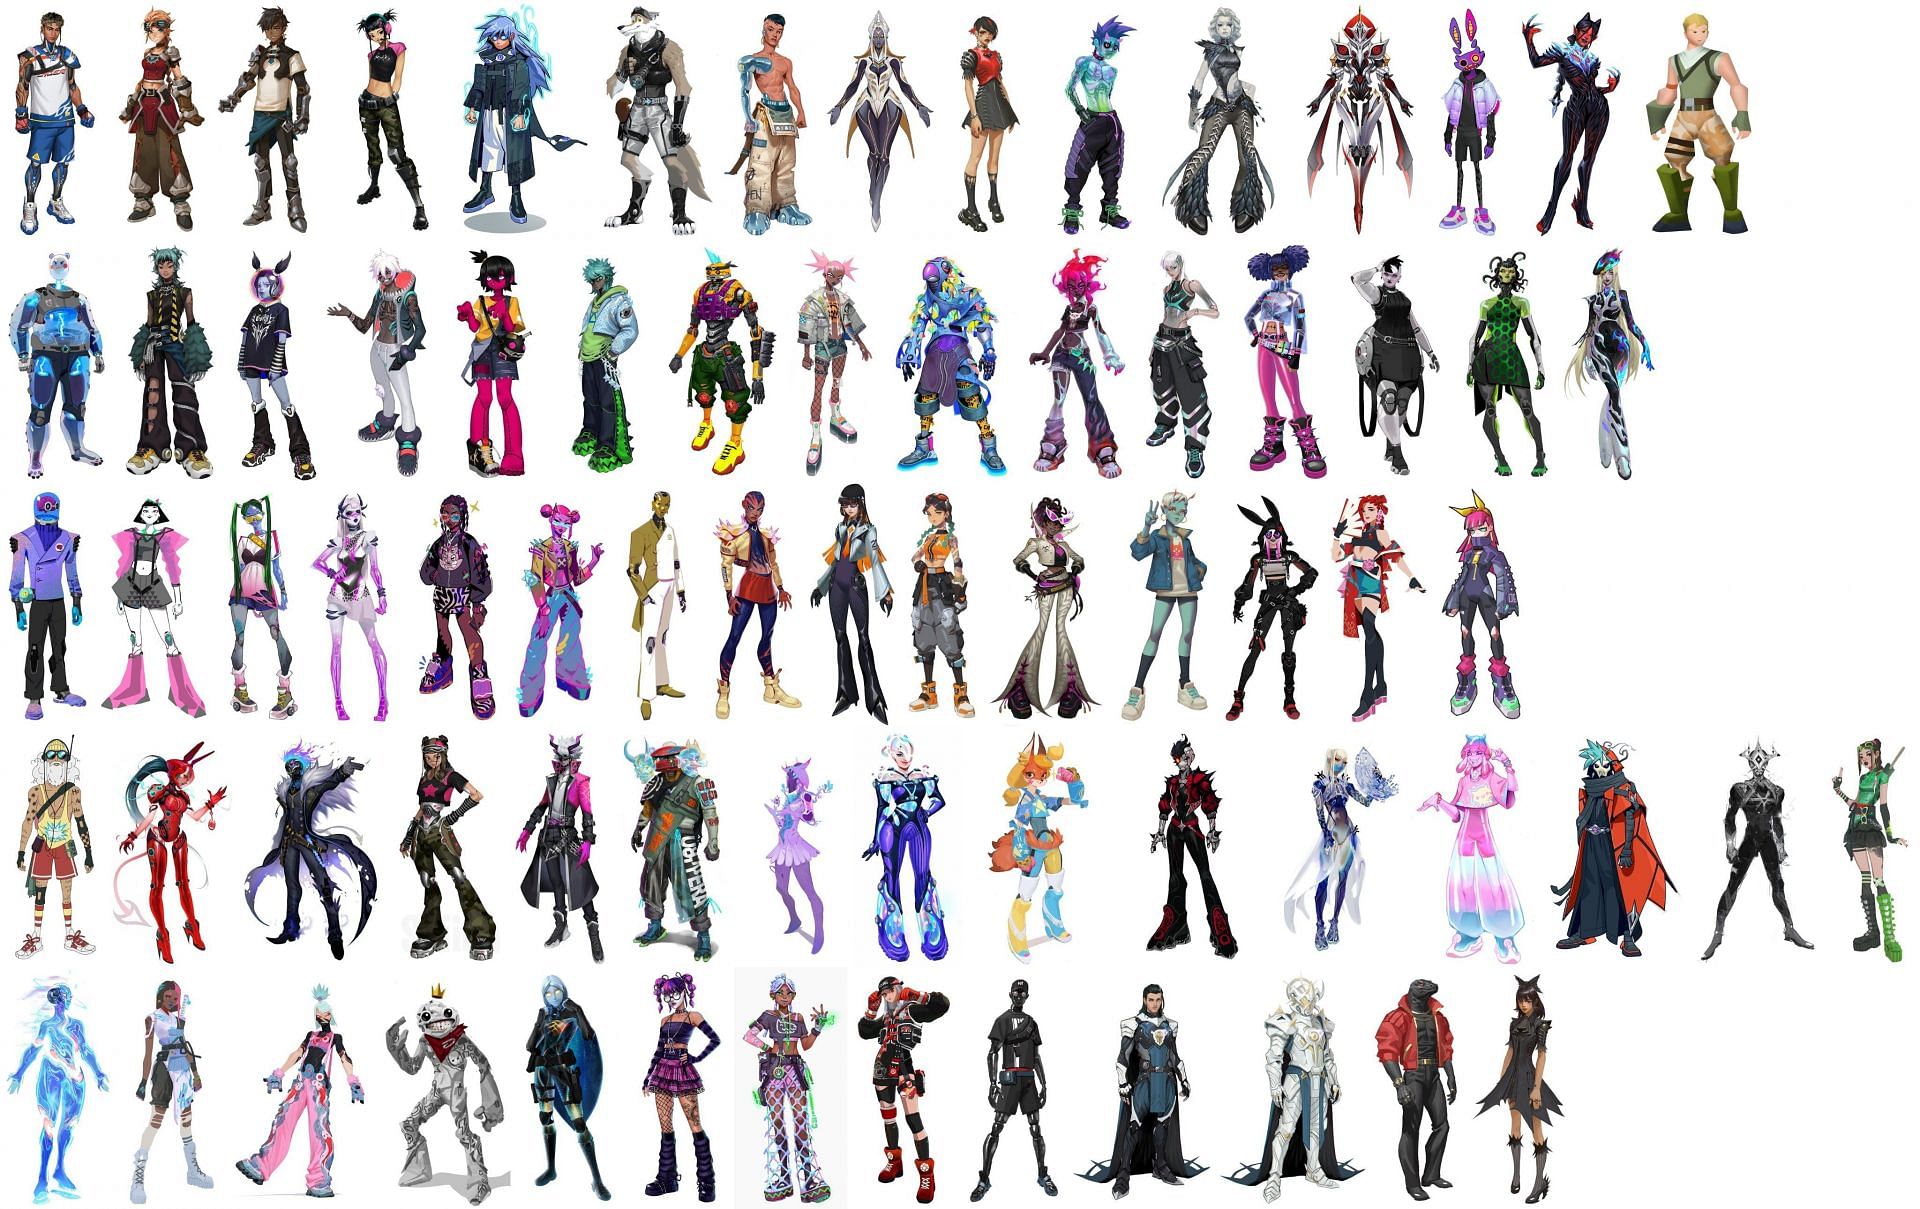 Fortnite survey from August shows upcoming skins (Image via Epic Games)